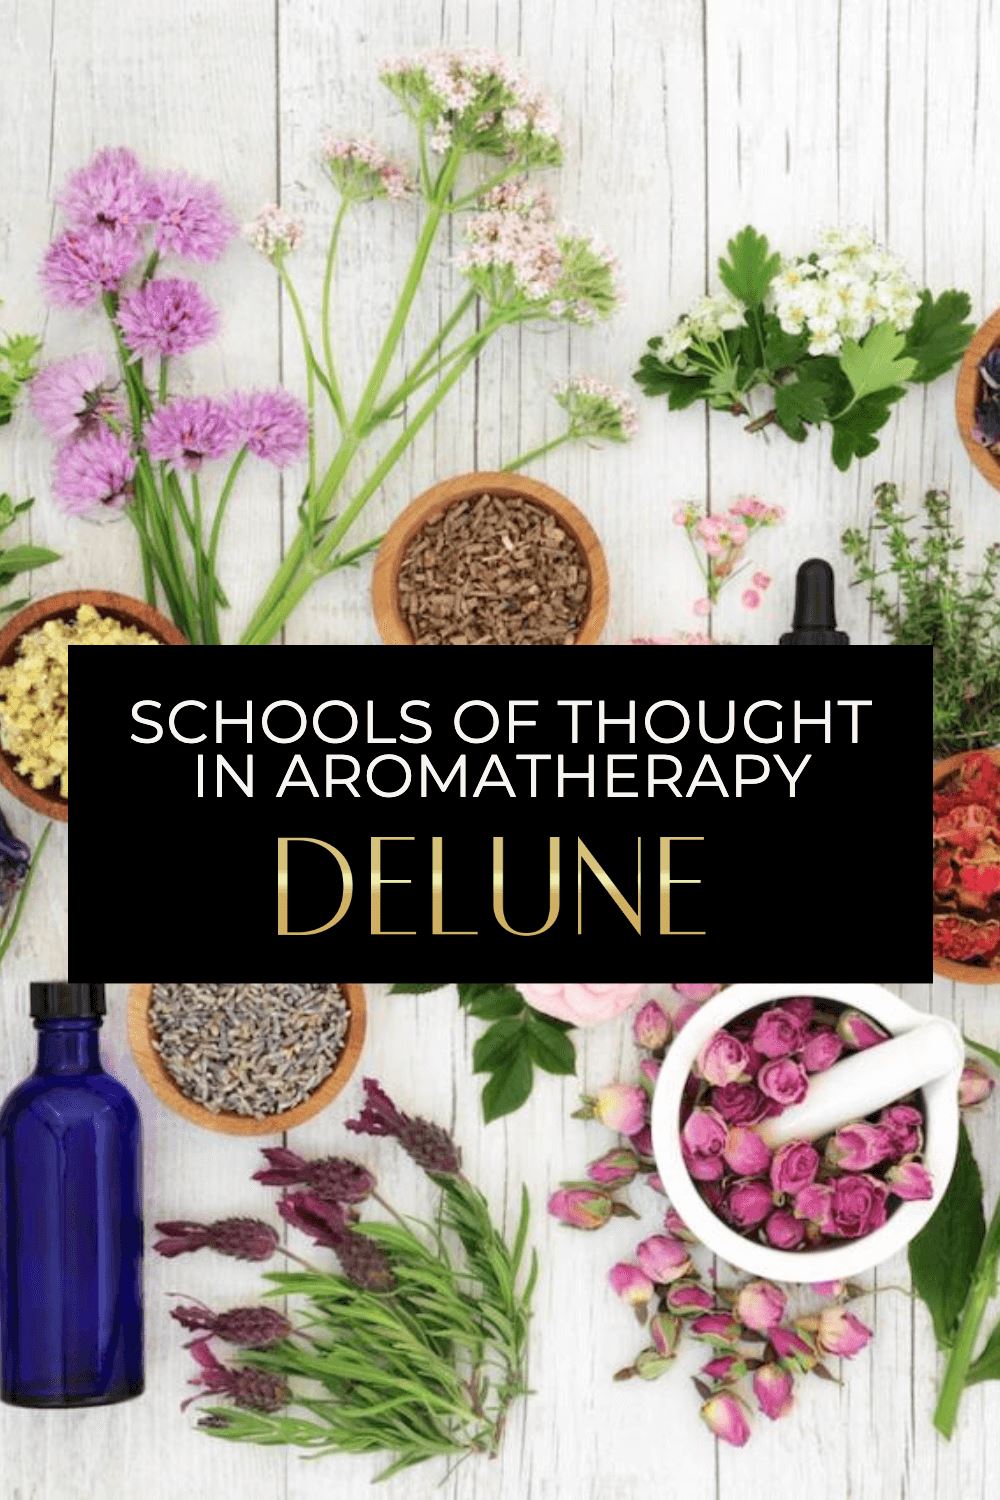 Schools of Thought in Aromatherapy